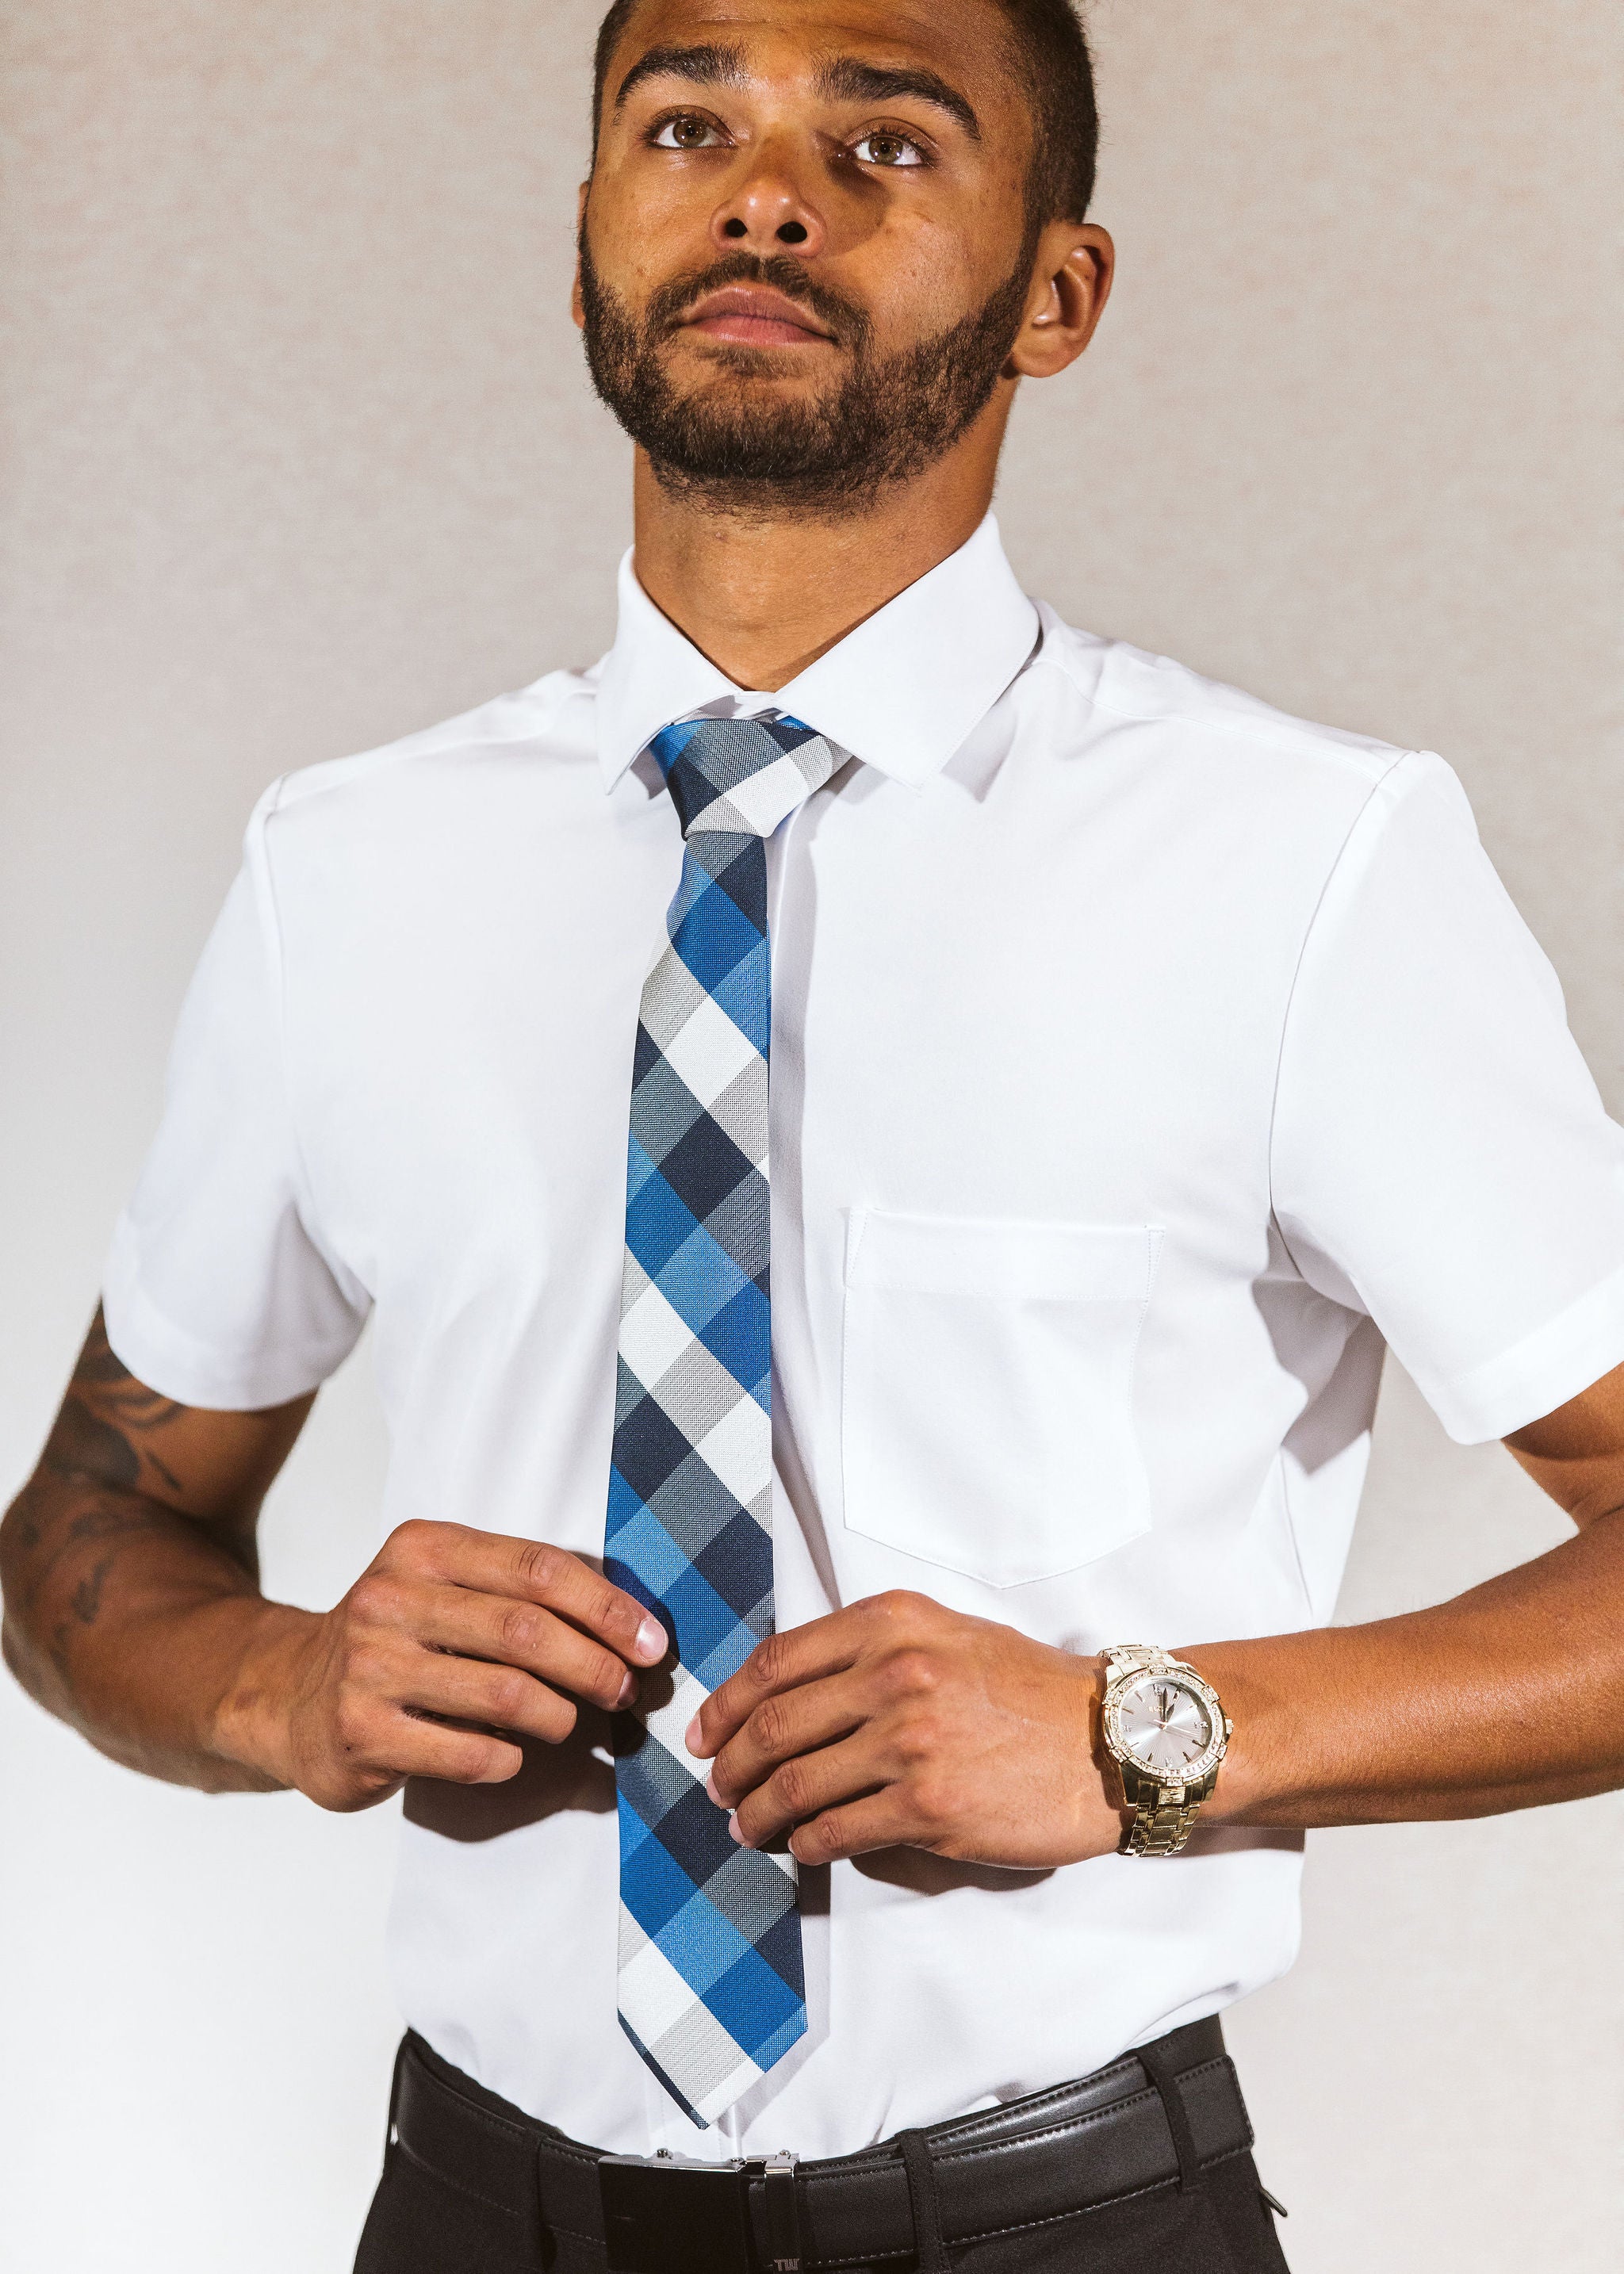 Men's Style Essentials: Top Picks for Collared Shirts